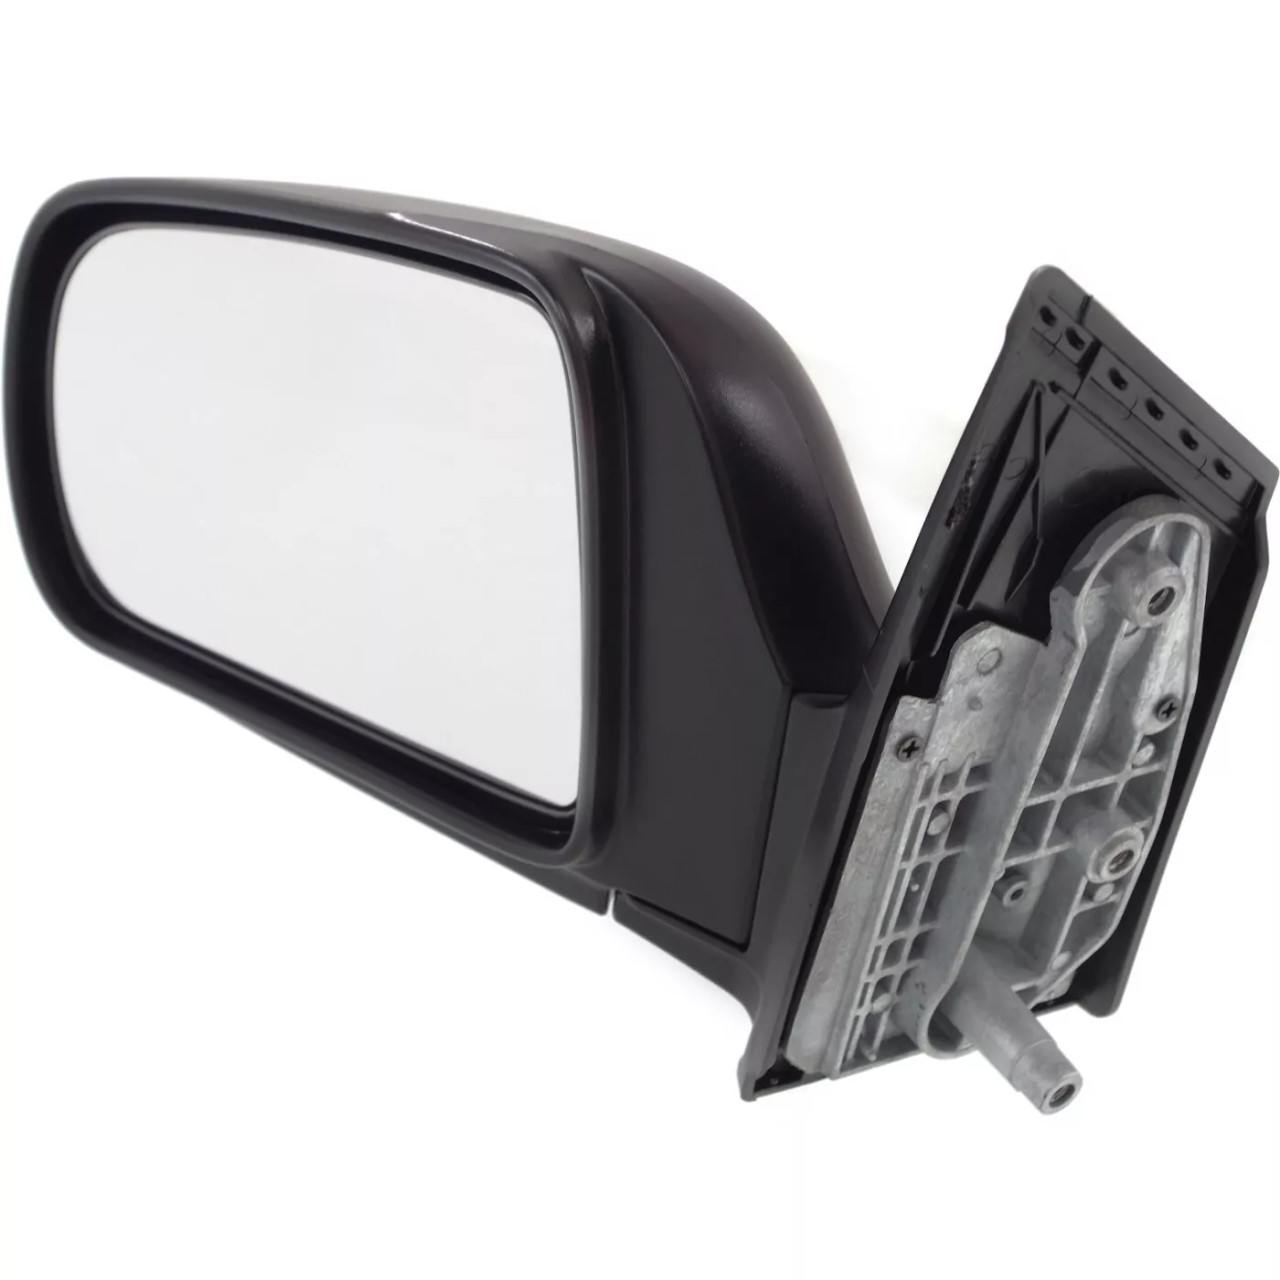 Mirror For 1998-2003 Toyota Sienna CE LE XLE Models Driver Side Paint To Match